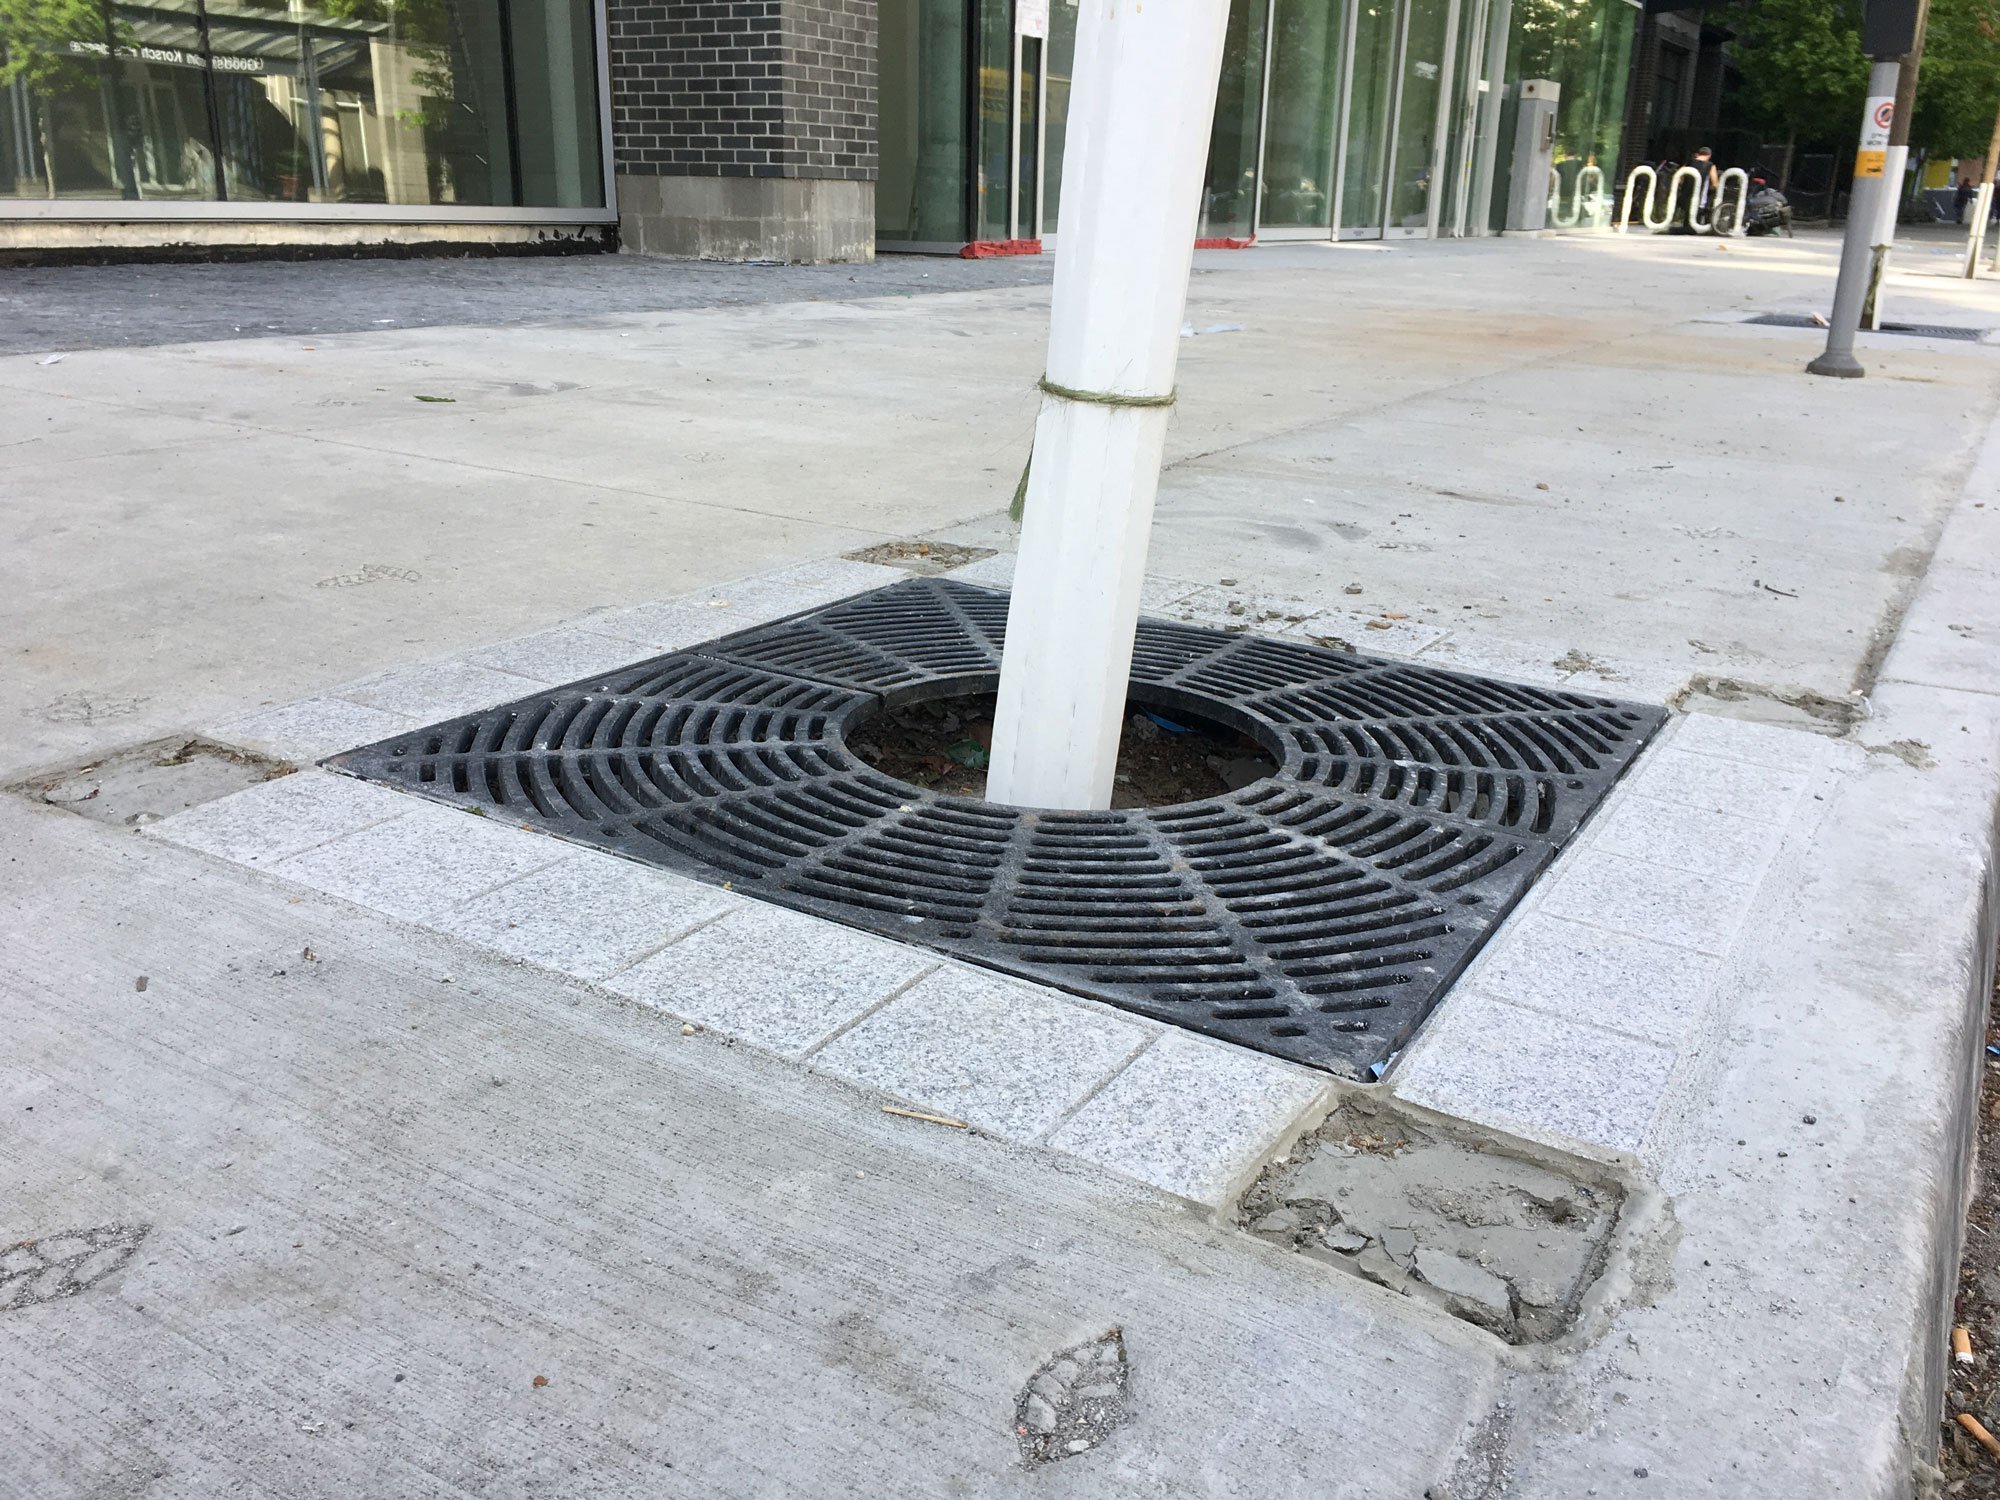 https://www.urbanyvr.com/wp-content/uploads/2019/05/Missing-brass-medallions-in-front-of-Tate.jpg